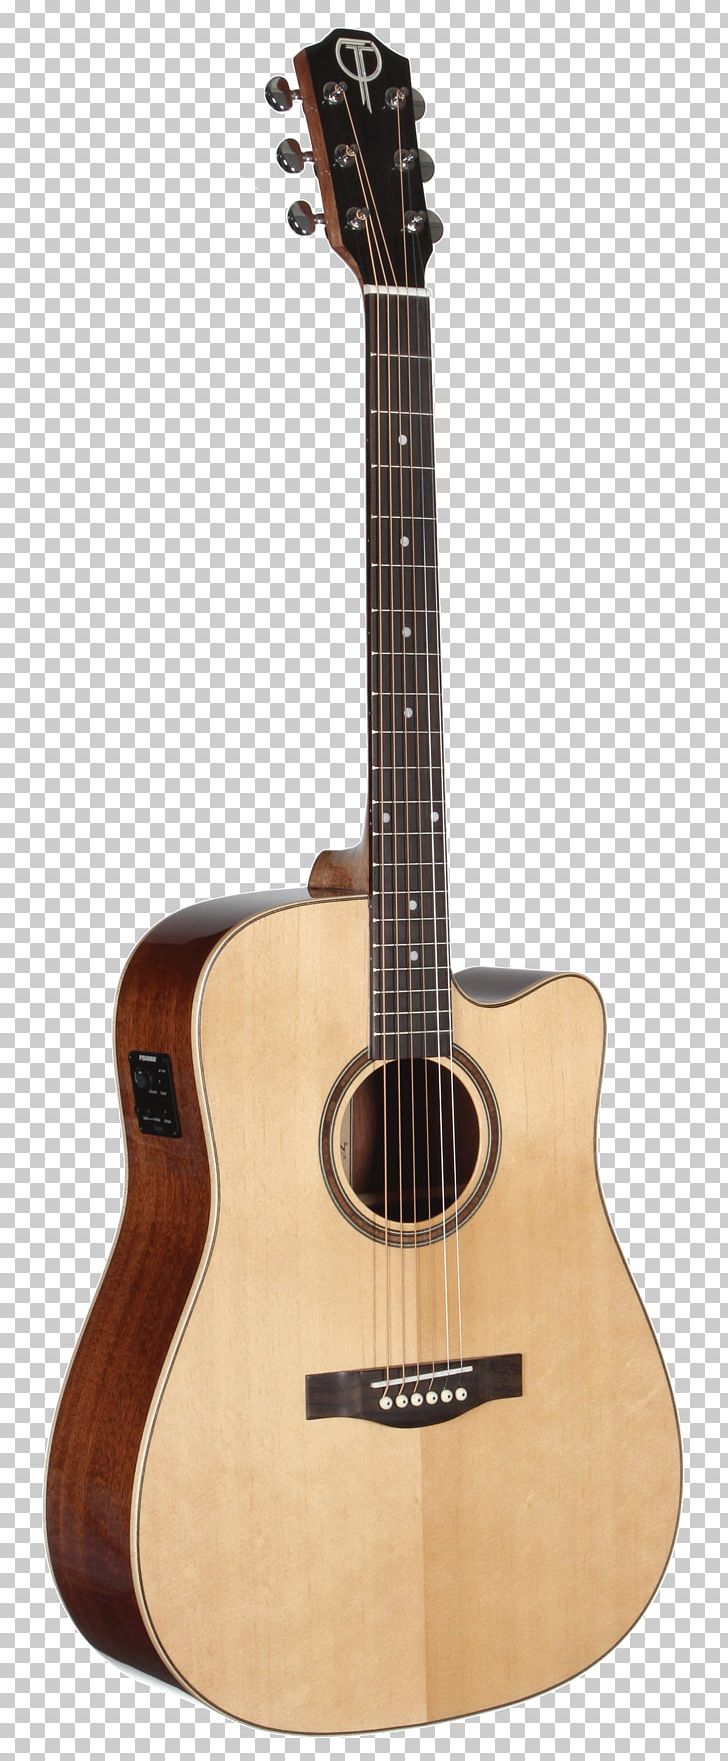 Alhambra Classical Guitar Steel-string Acoustic Guitar PNG, Clipart, Classical Guitar, Cloth Bags, Cuatro, Cutaway, Guitar Accessory Free PNG Download